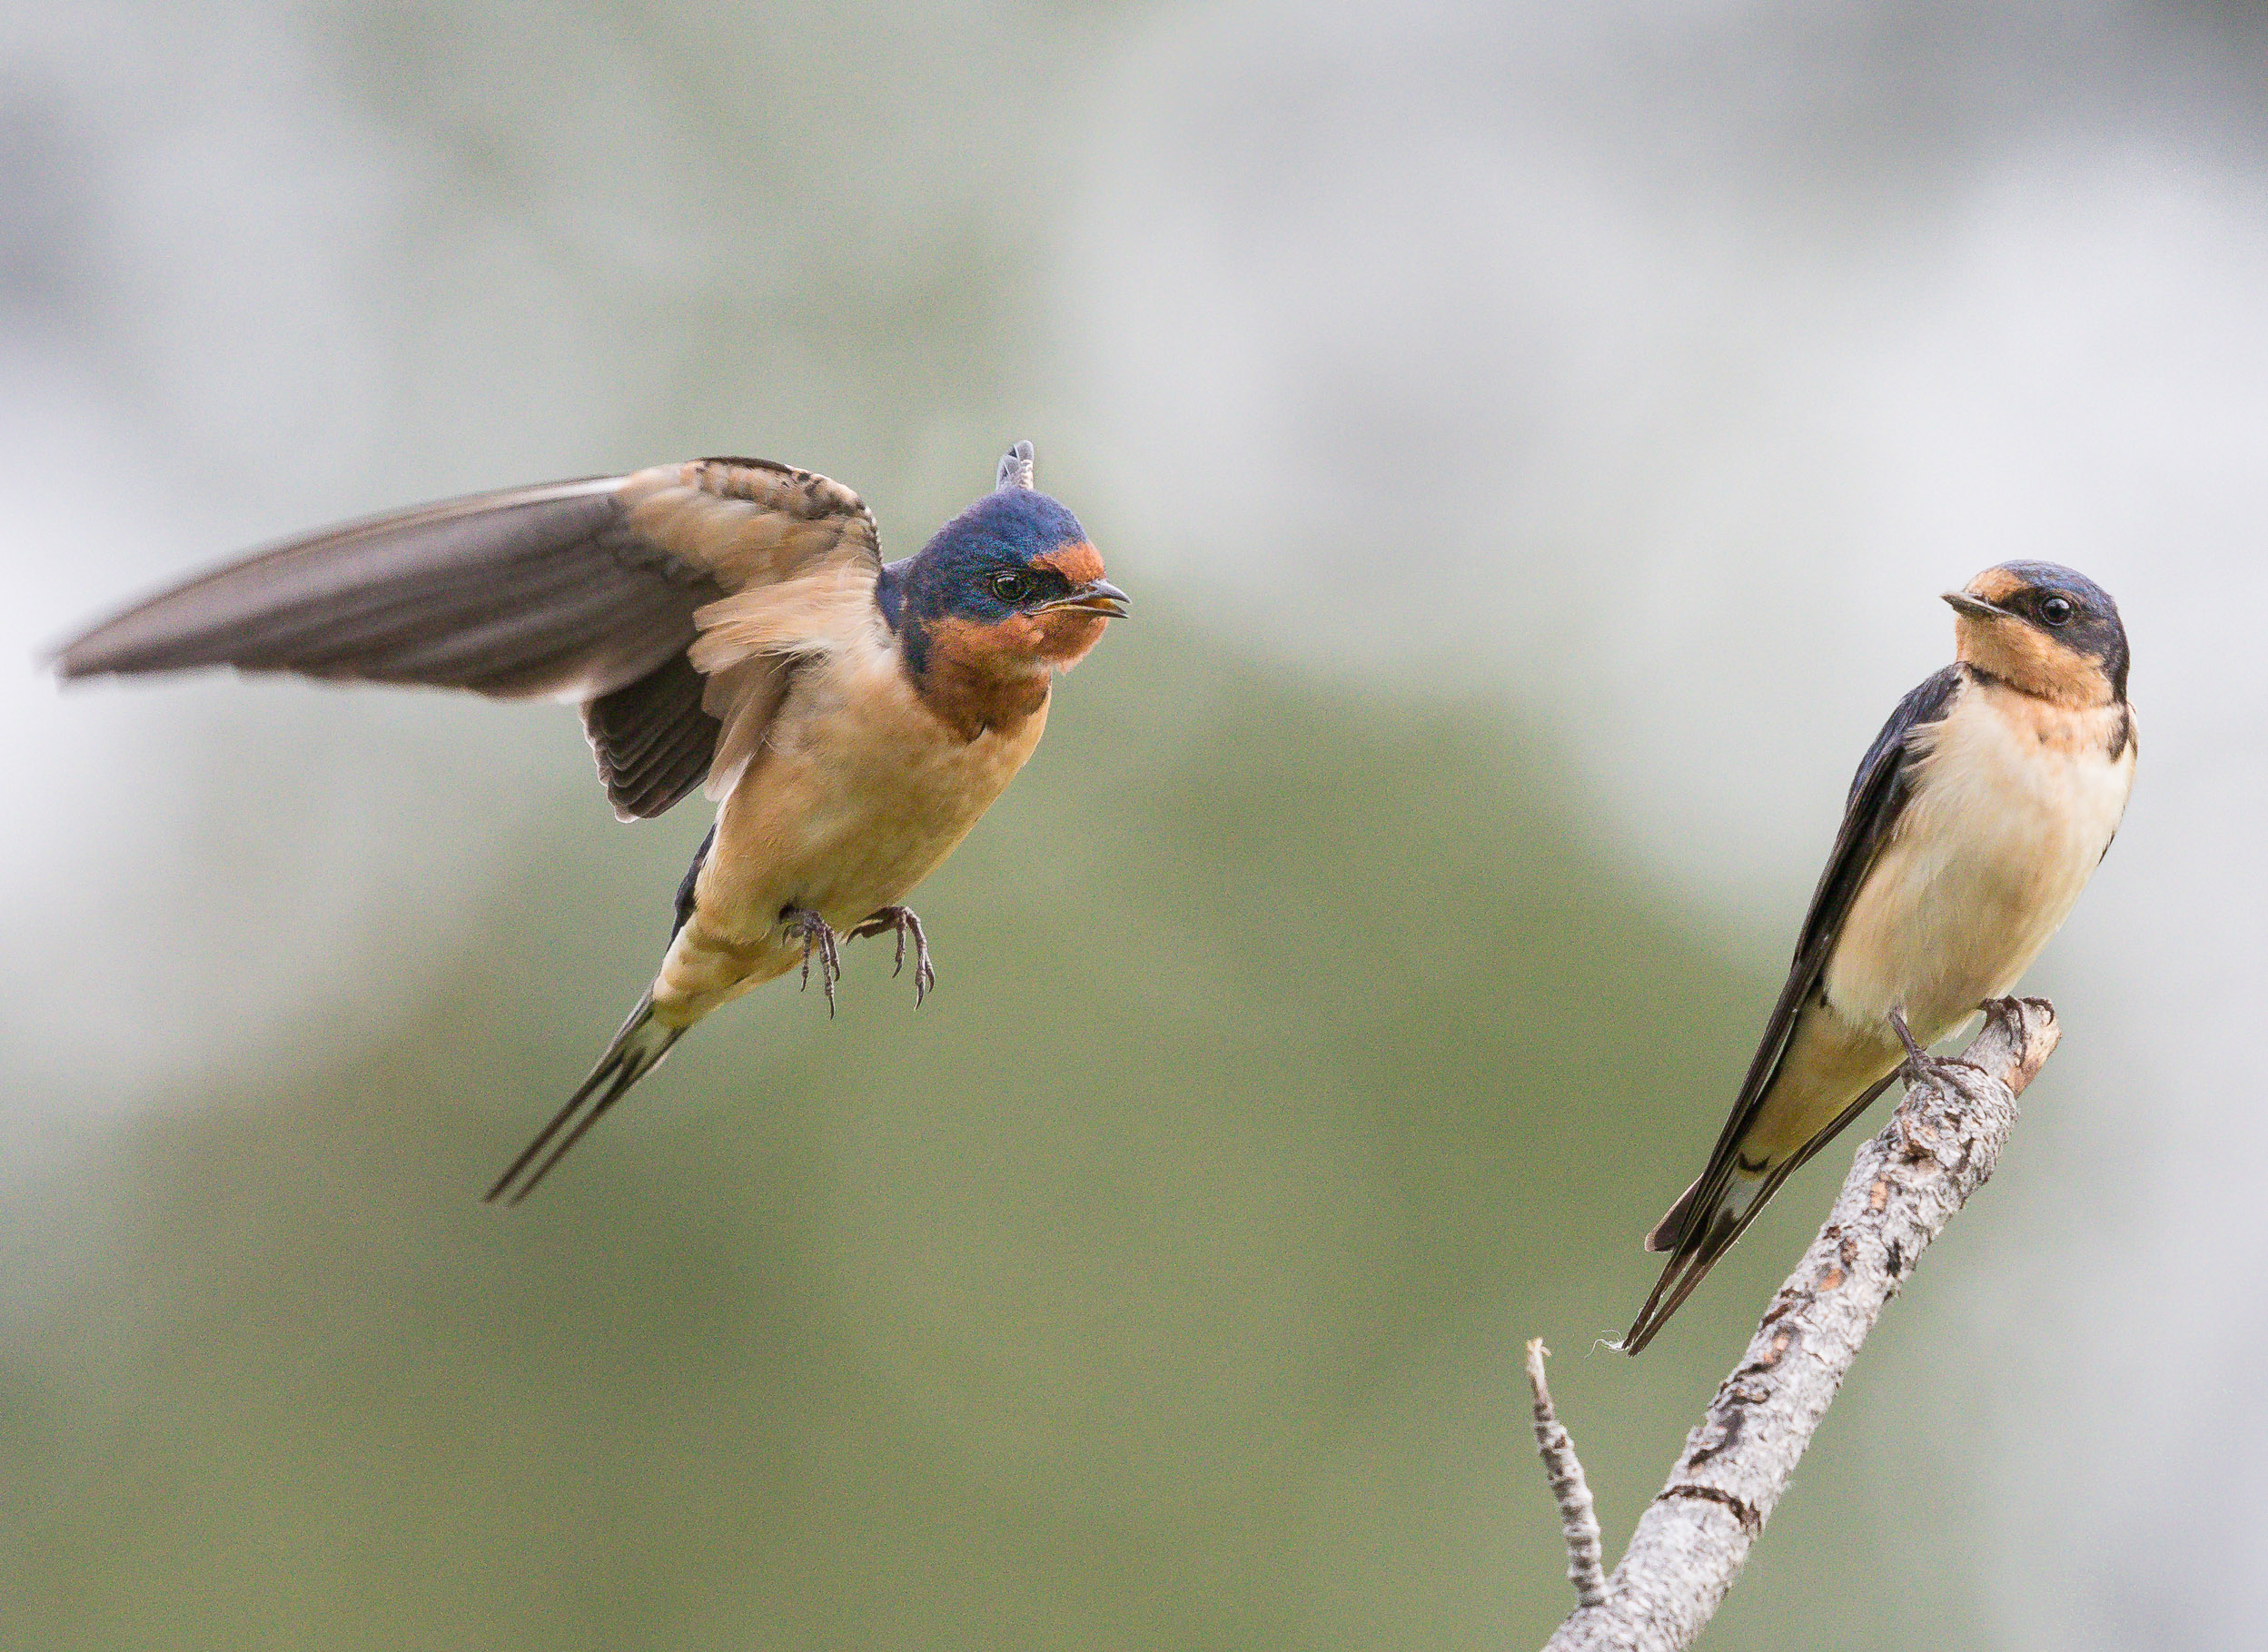 Two birds, one perched on a stick and the other in flight.